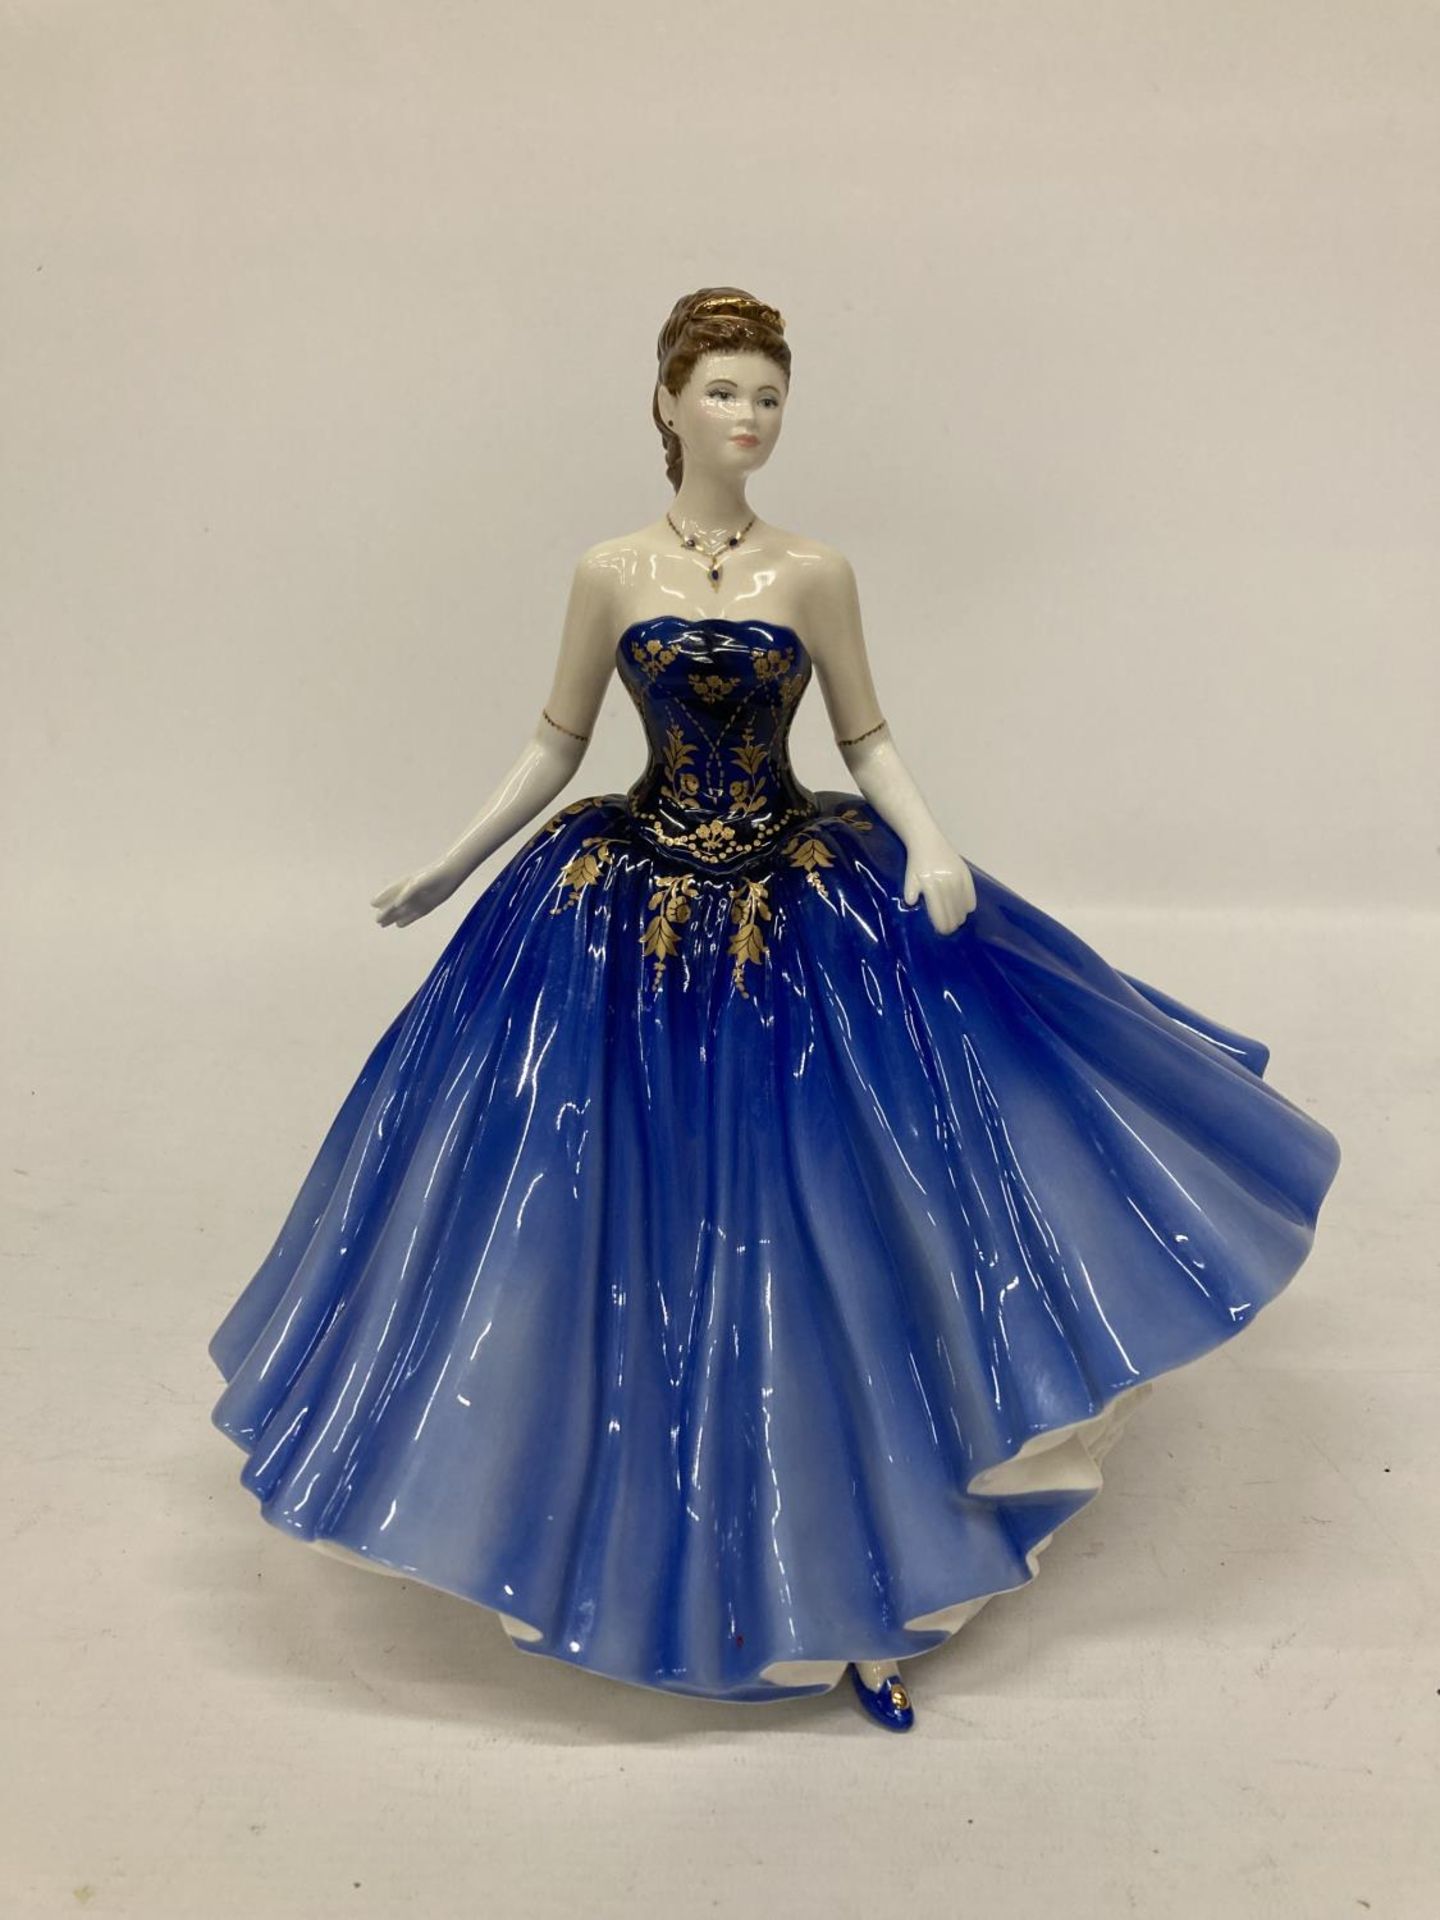 A ROYAL DOULTON FIGURINE FROM THE CLASSICS COLLECTION "ABIGAIL" LADY OF THE YEAR 2006 HN4824